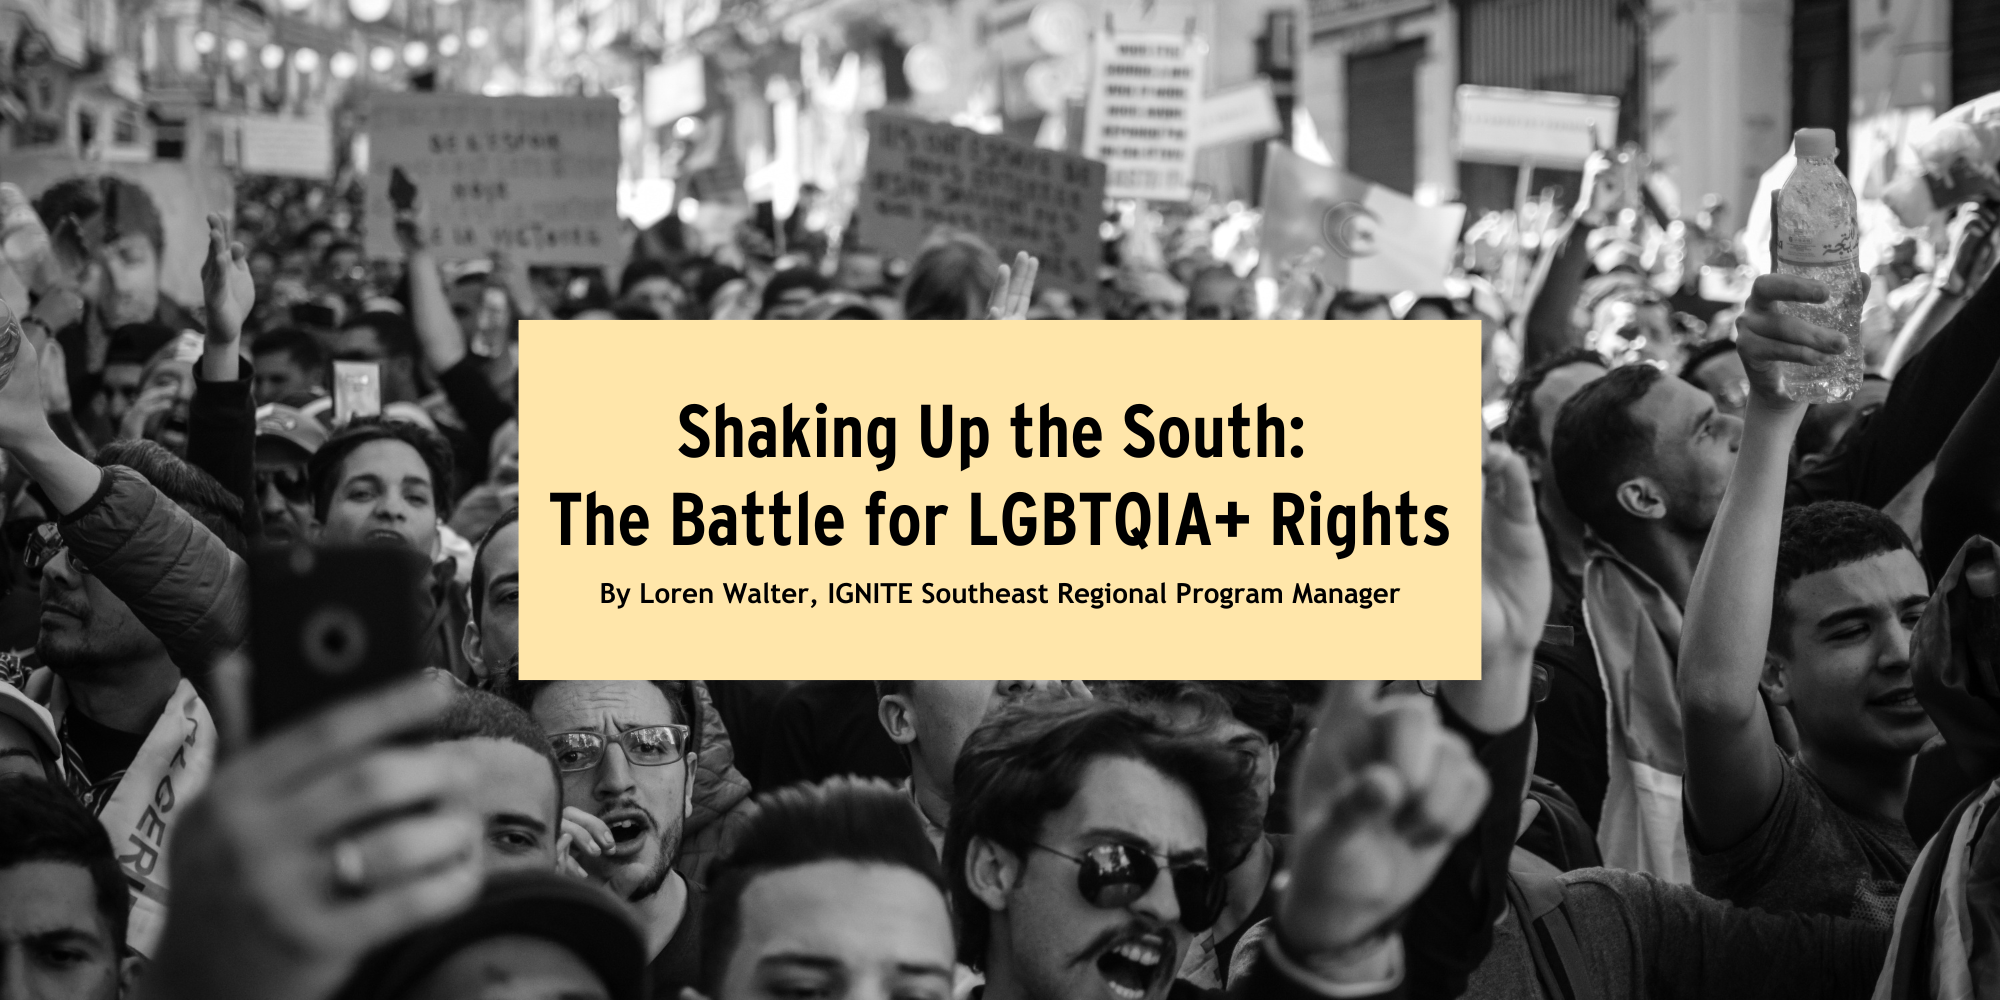 Loren Blog post: Shaking up the south, the battle for LGBTQIA+ Rights